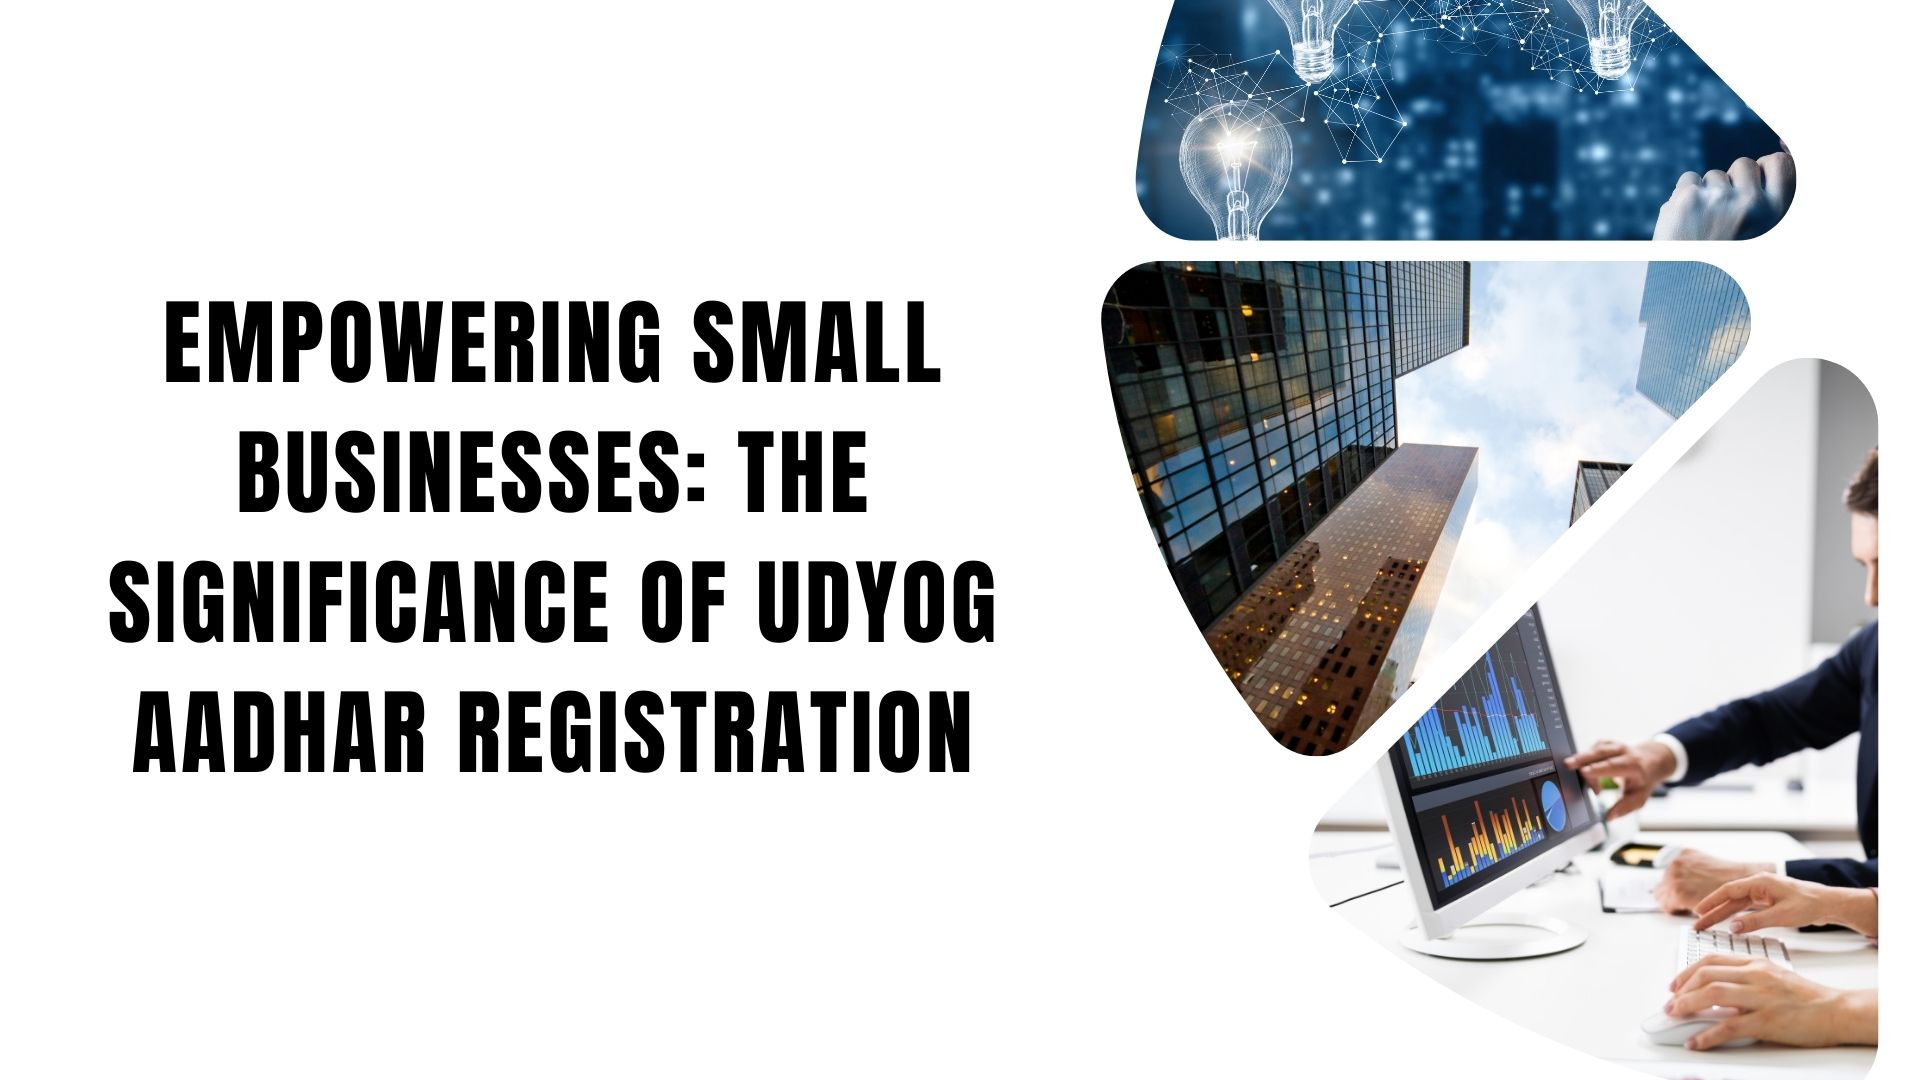 Empowering Small Businesses: The Significance of Udyog Aadhar Registration